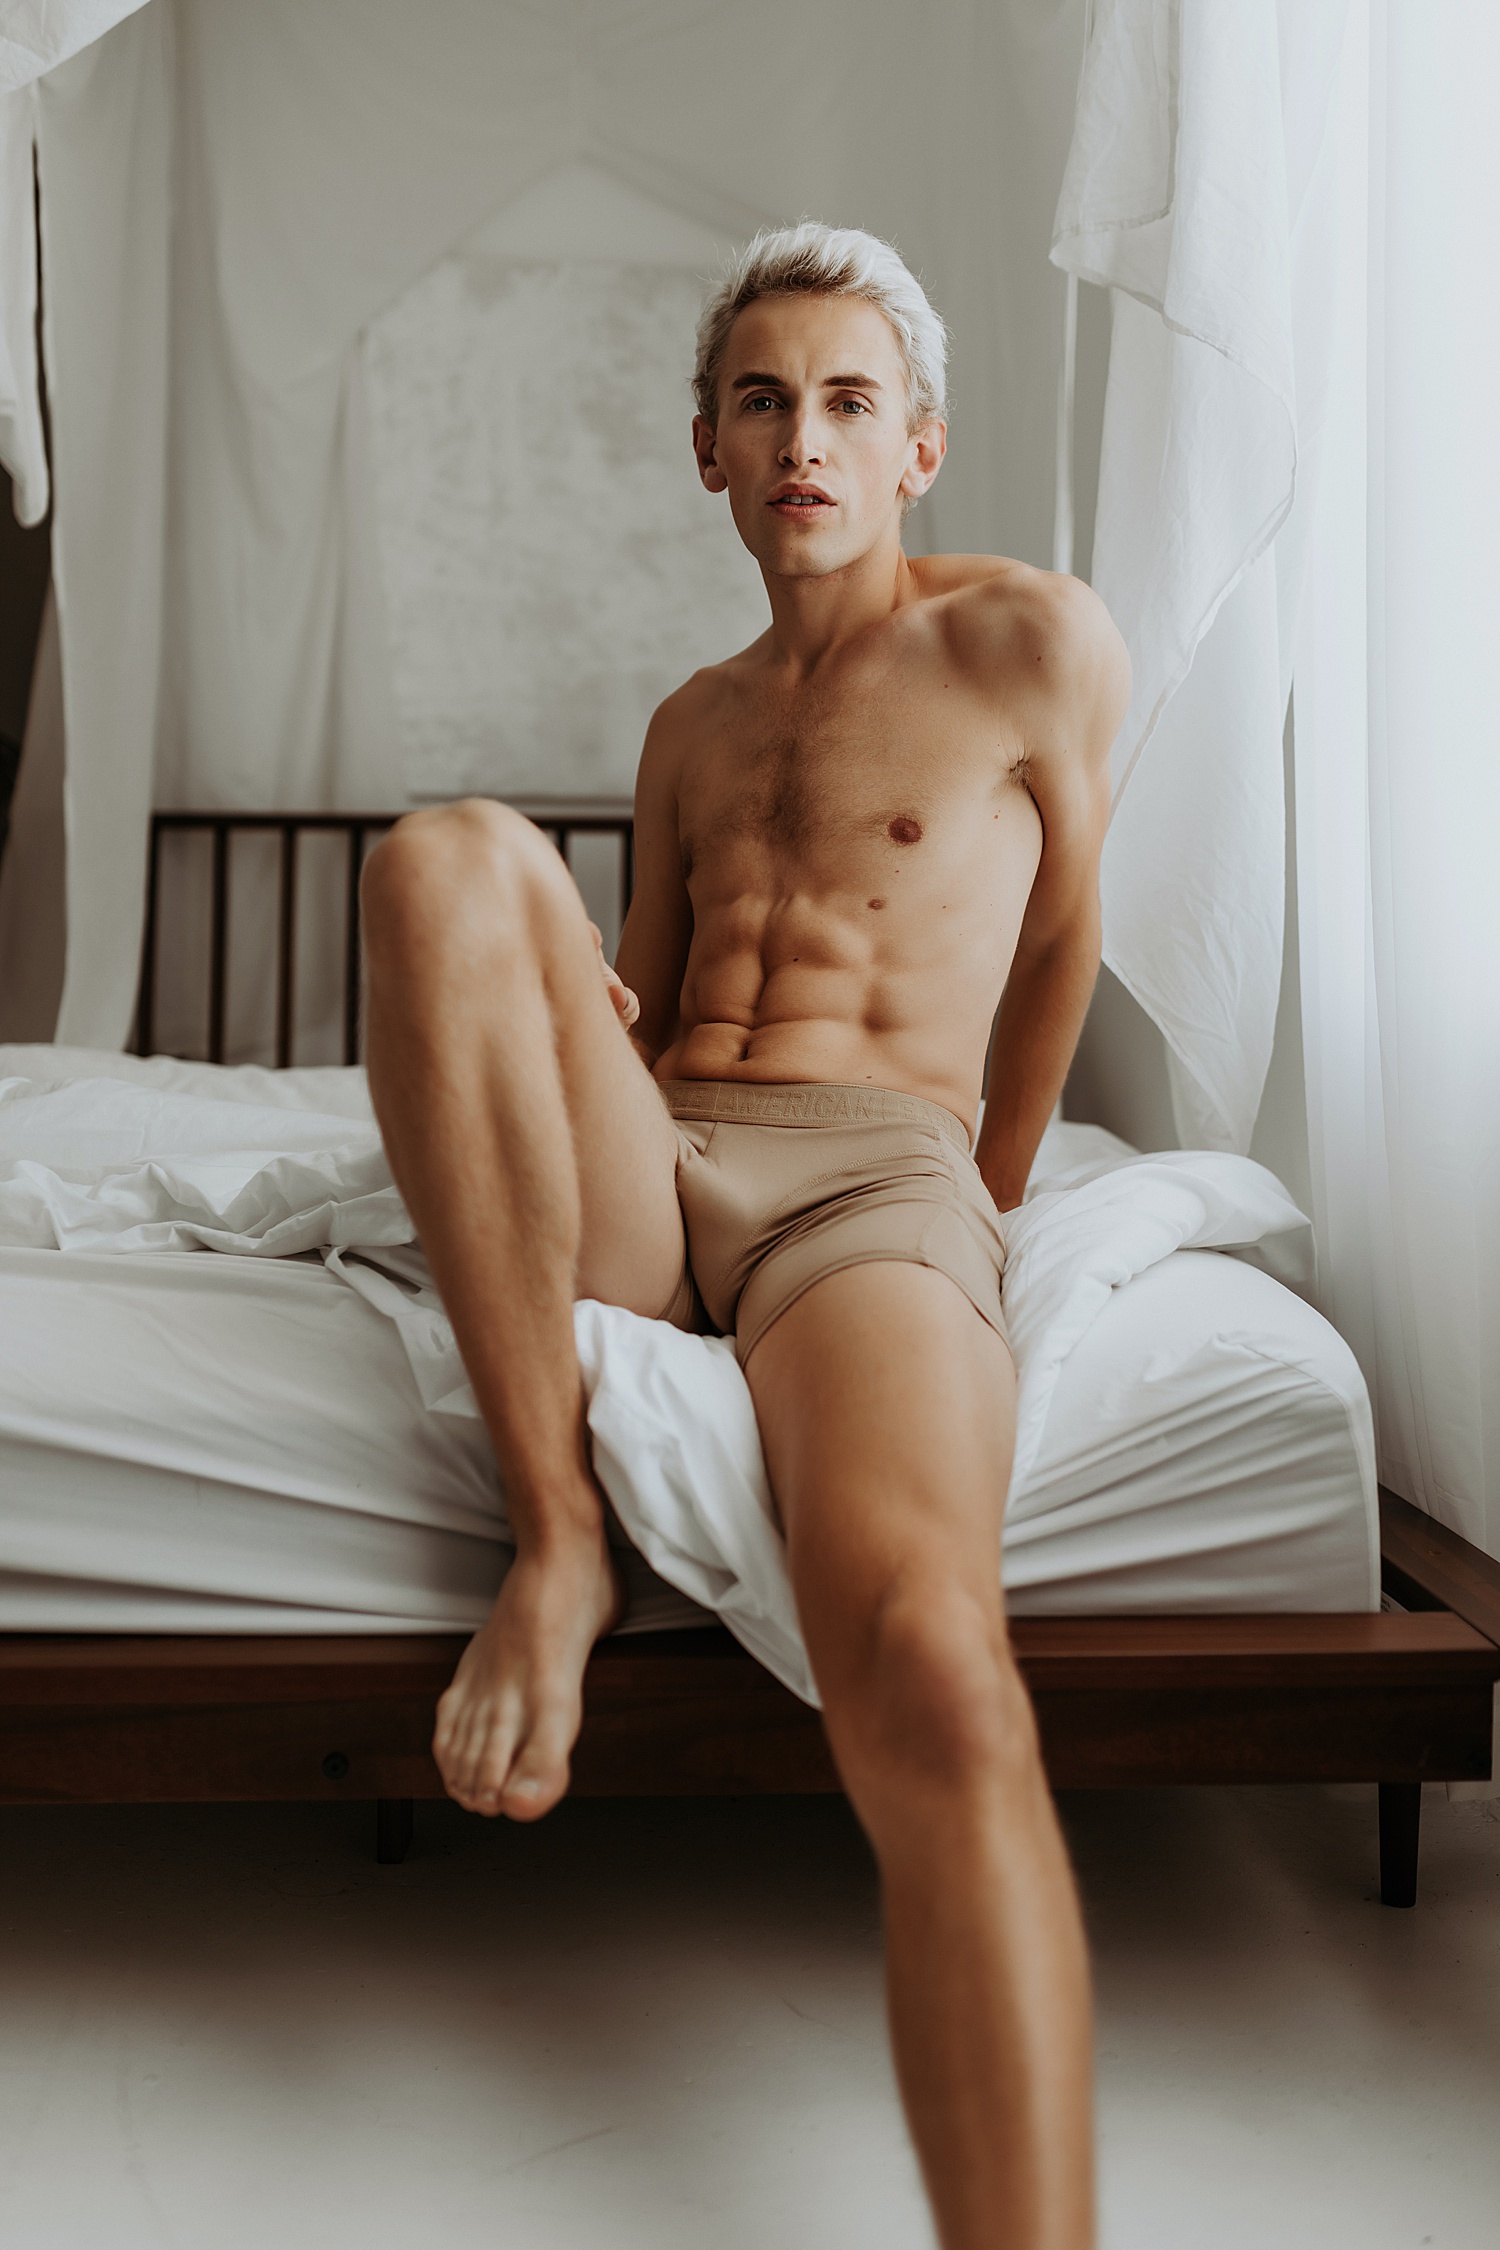 Man sitting on a bed in underwear for a studio boudoir session in Minnesota.